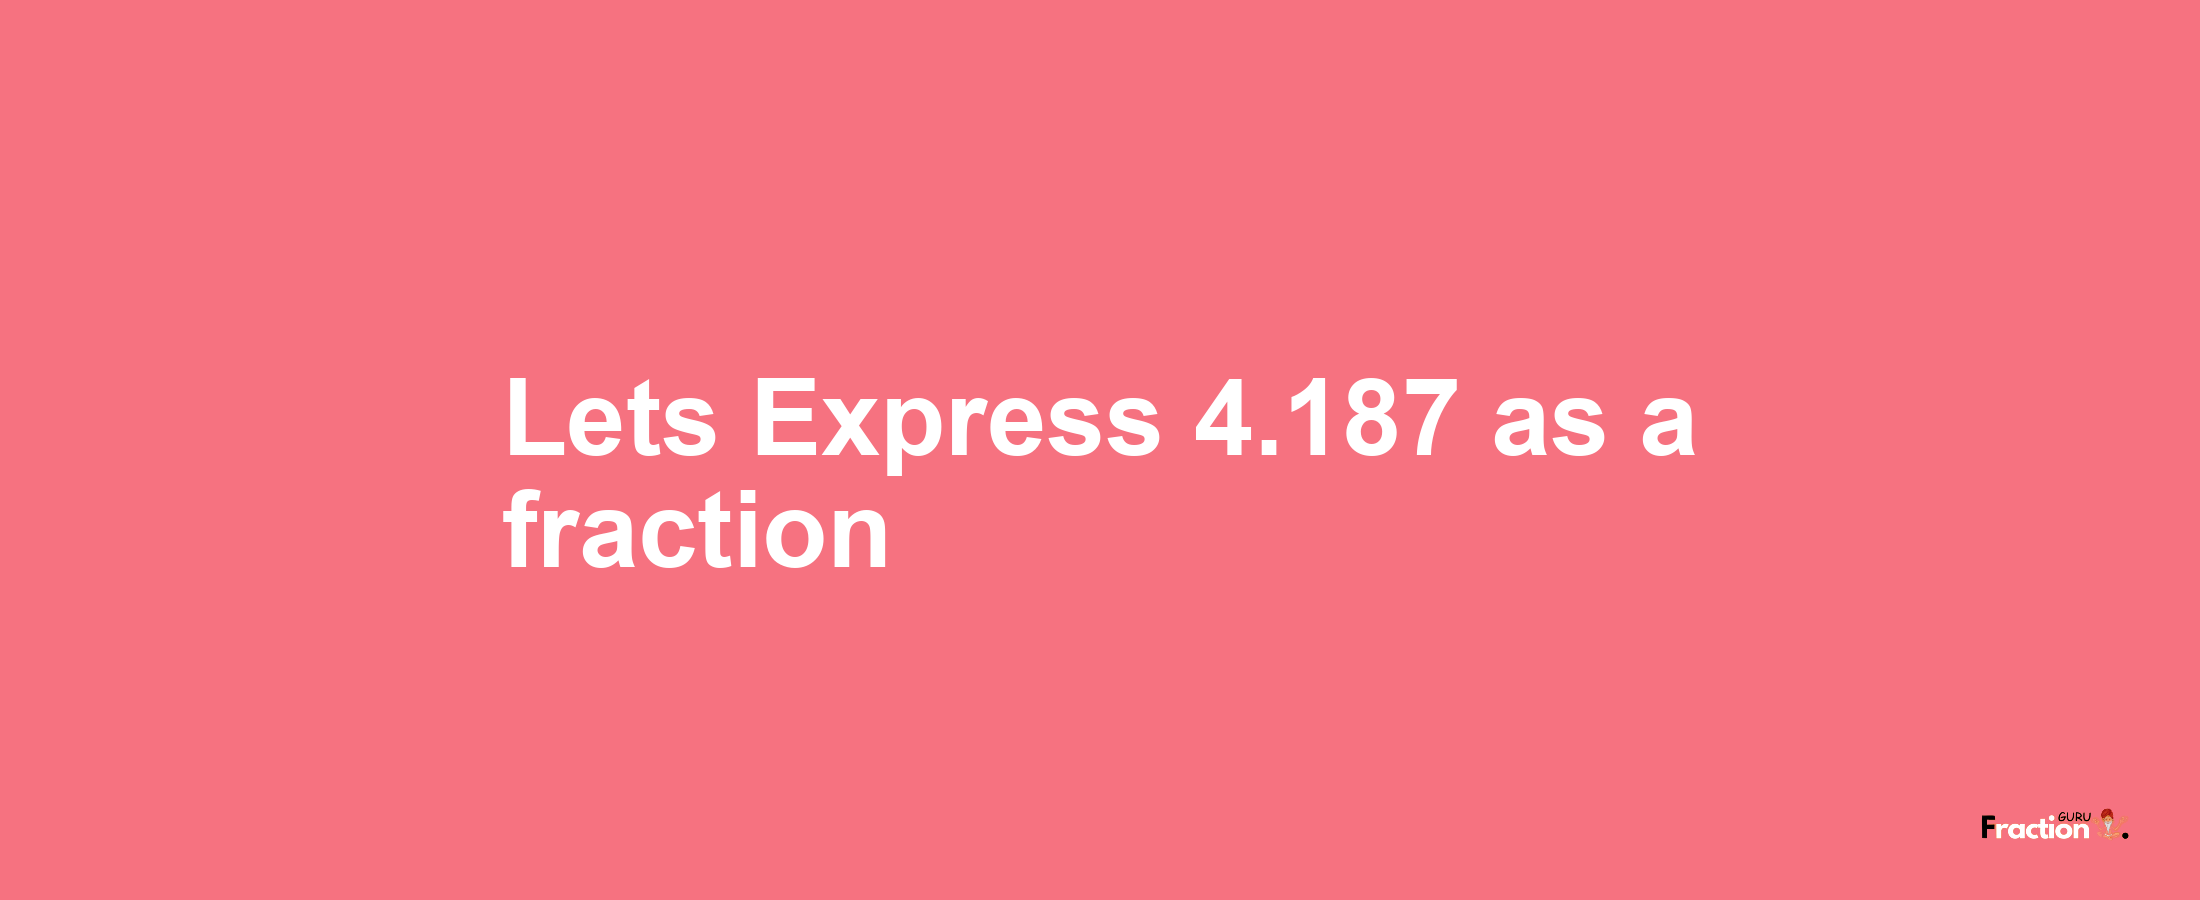 Lets Express 4.187 as afraction